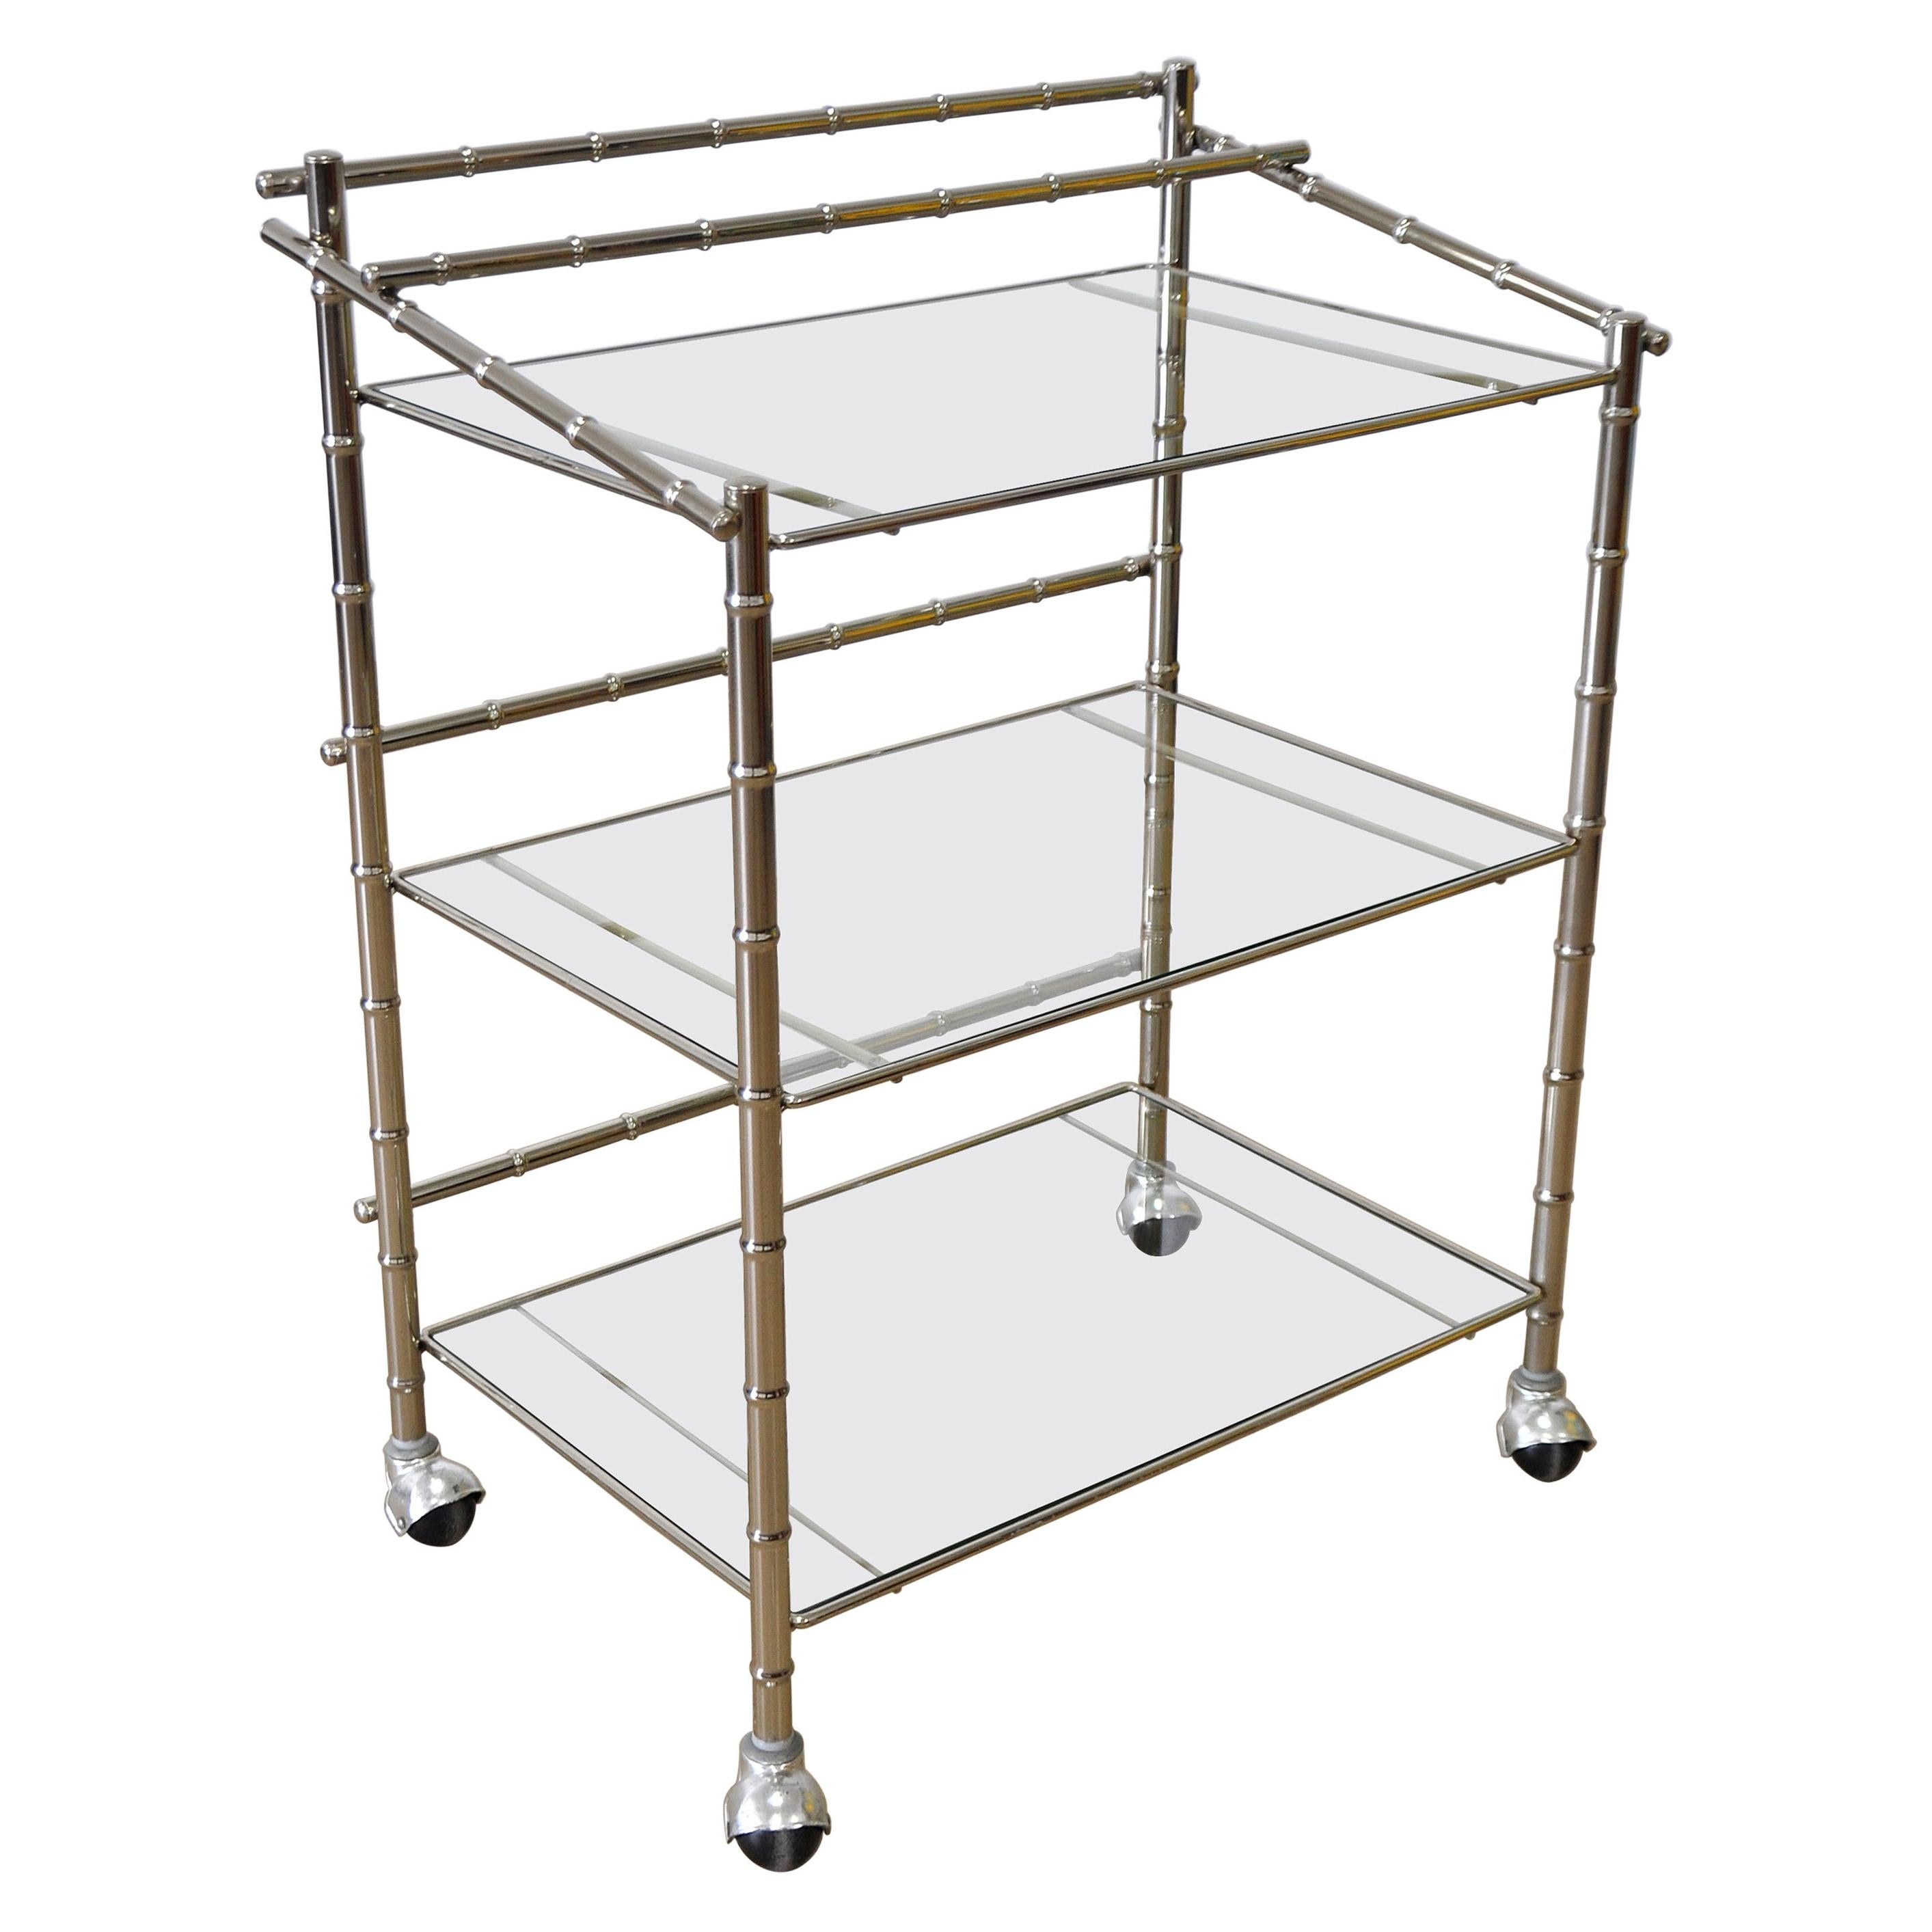 A fabulous Hollywood Regency three-tier rolling serving trolley. The bar or tea cart features a chrome faux rattan frame and multiple tiers with inset clear glass. A stunning Mid-Century Modern design! Measures: Height to top tier 30 in.